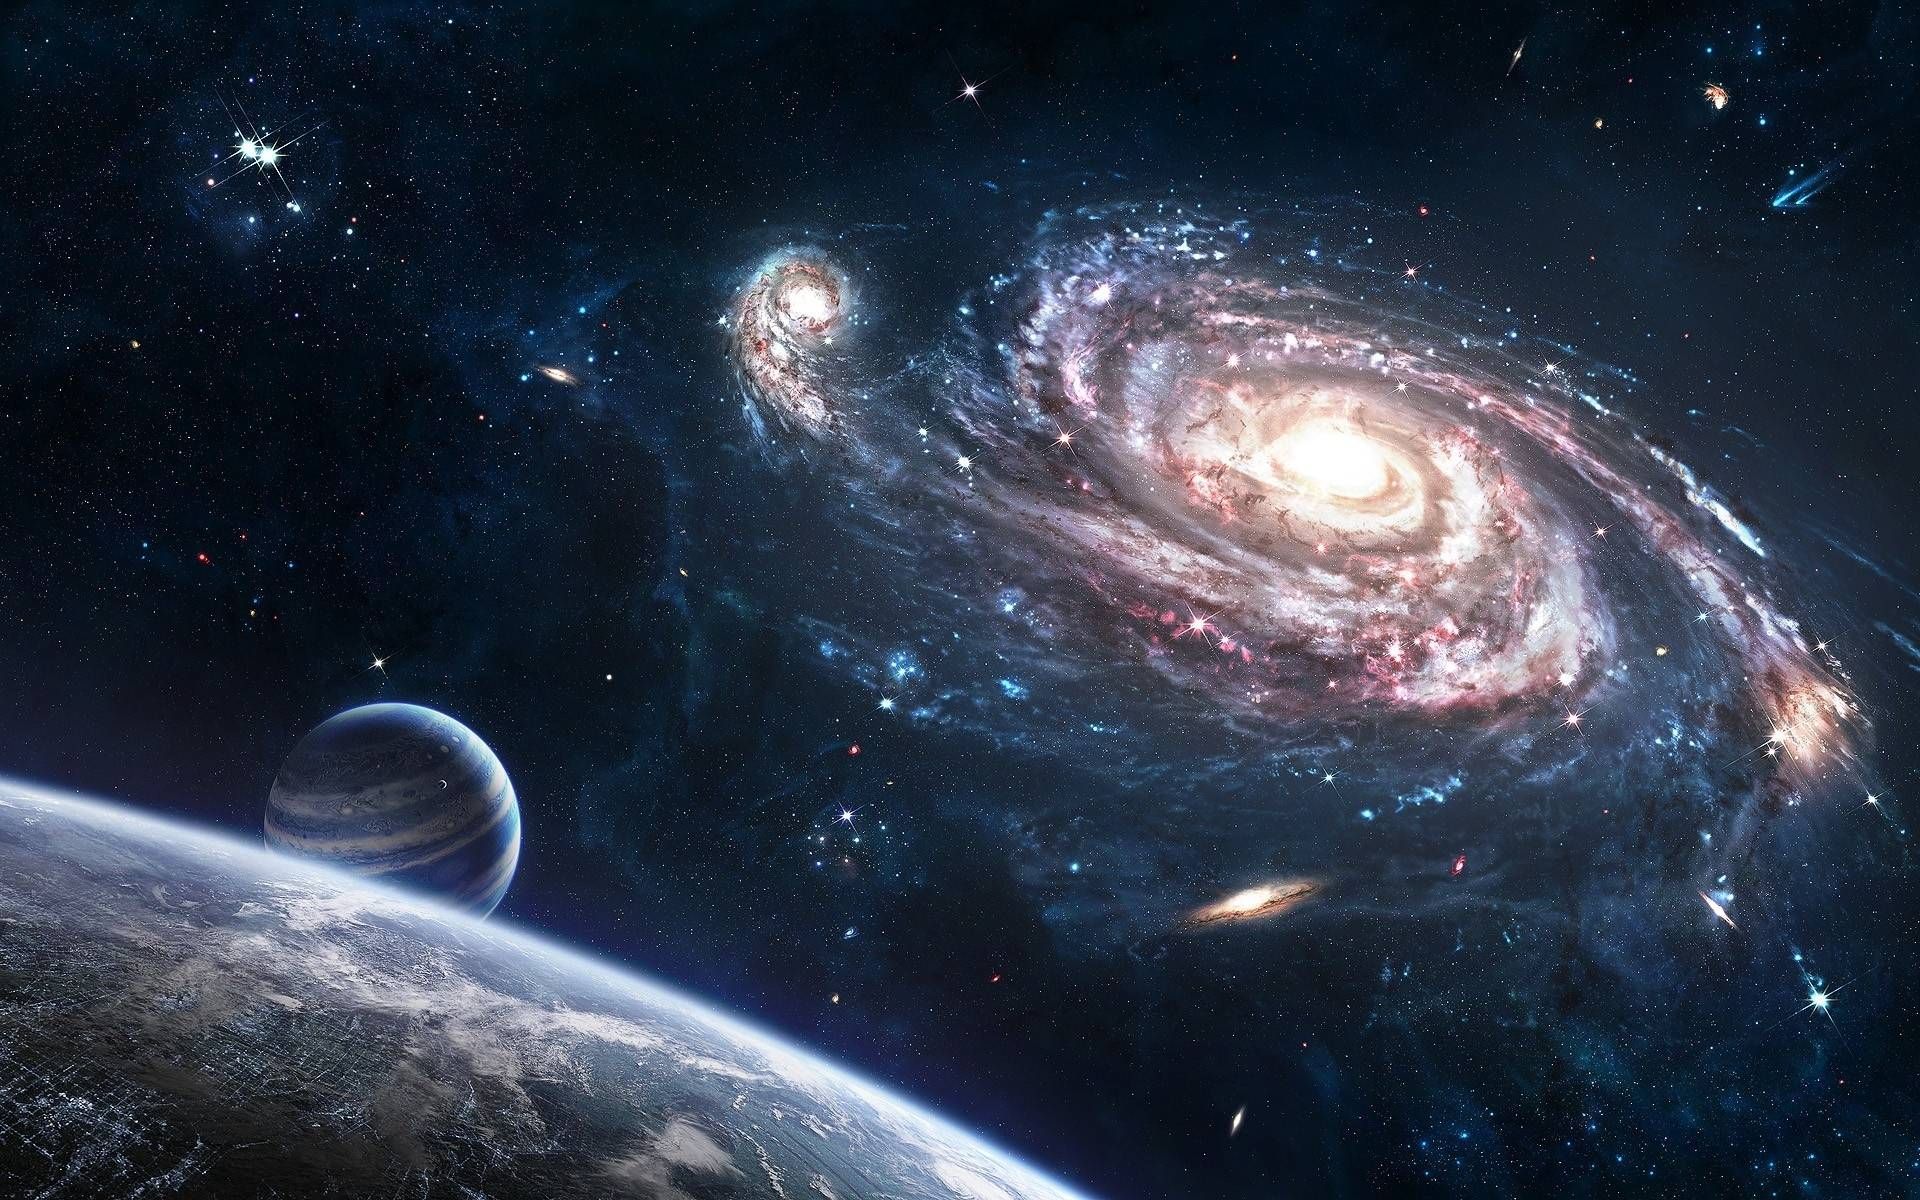 Outer space hd wallpapers high resolution